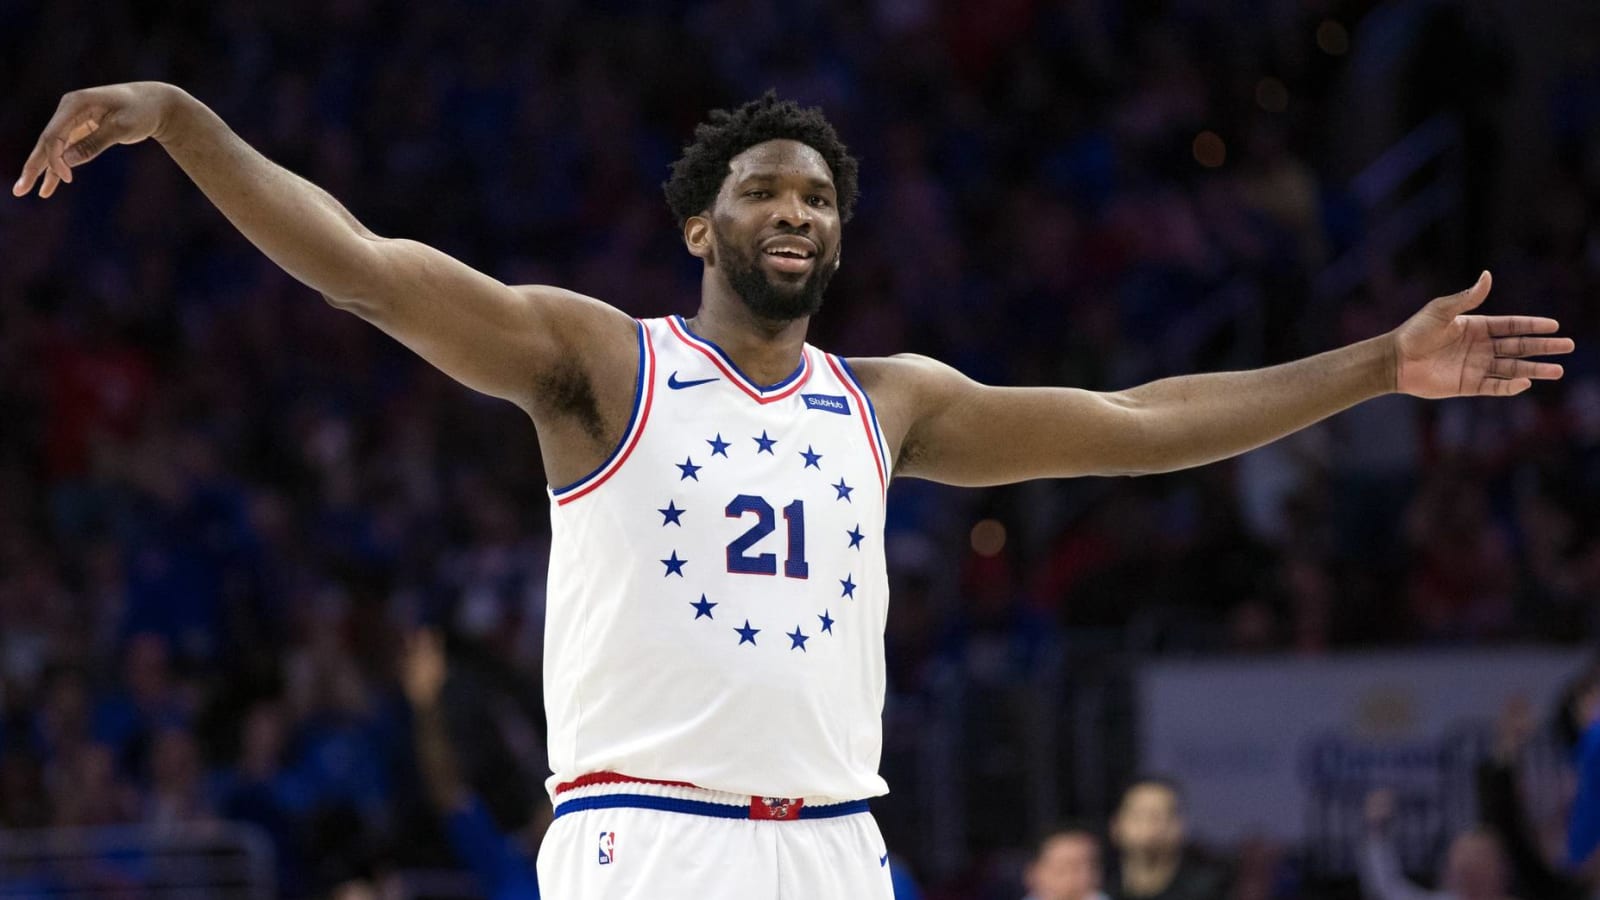 Jeff Van Gundy outraged over talk of Joel Embiid as 'all-time great'